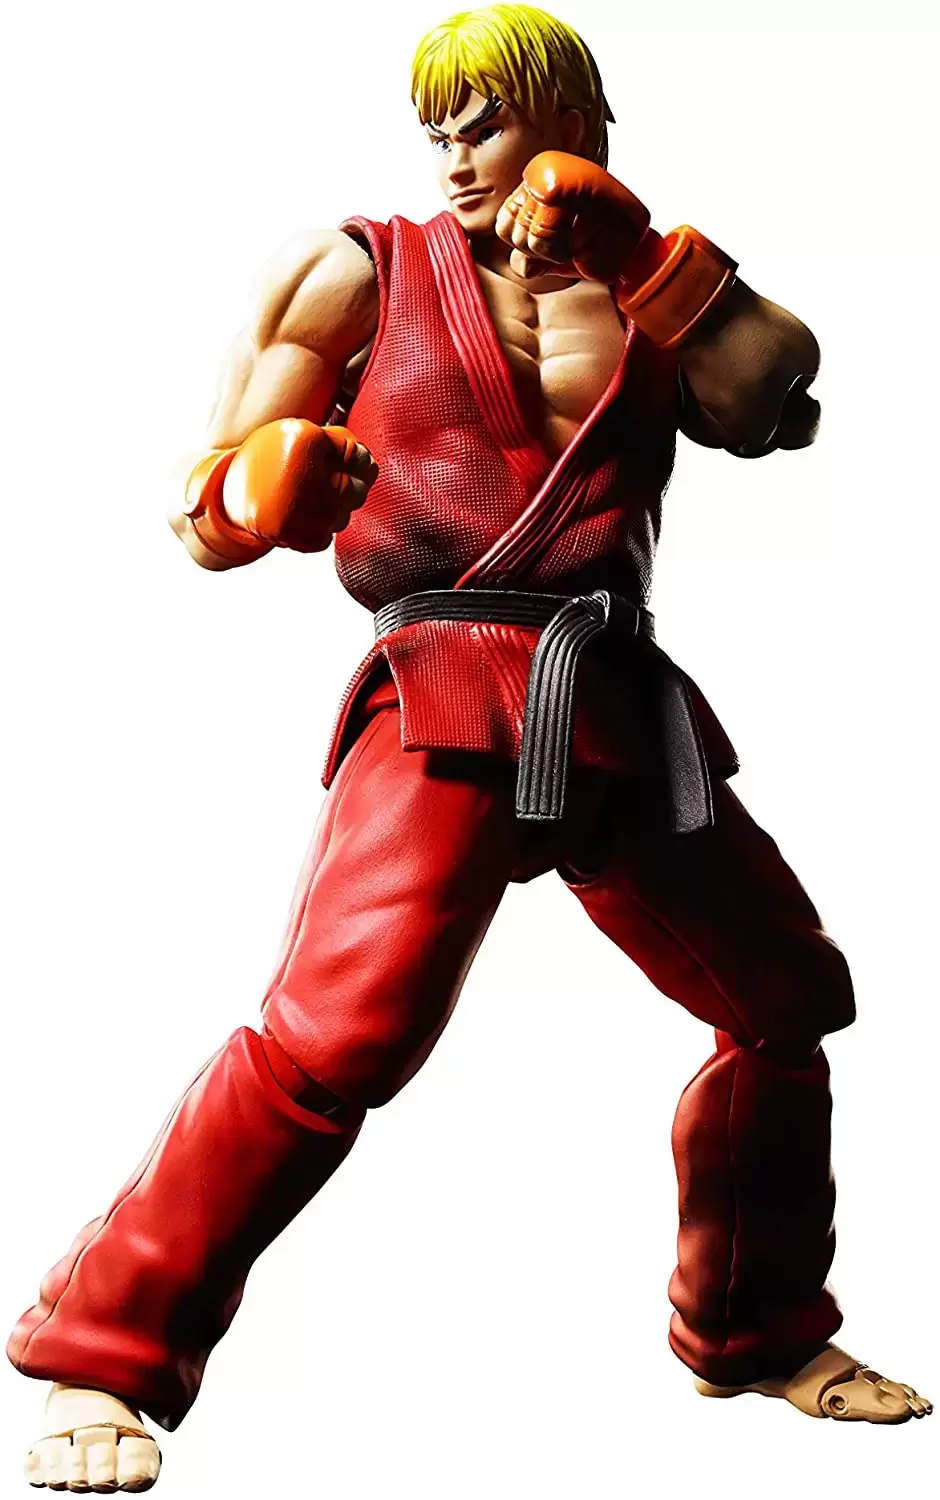 S.H. Figuarts Video Games - Street Fighter (No. 07) - Ken Masters